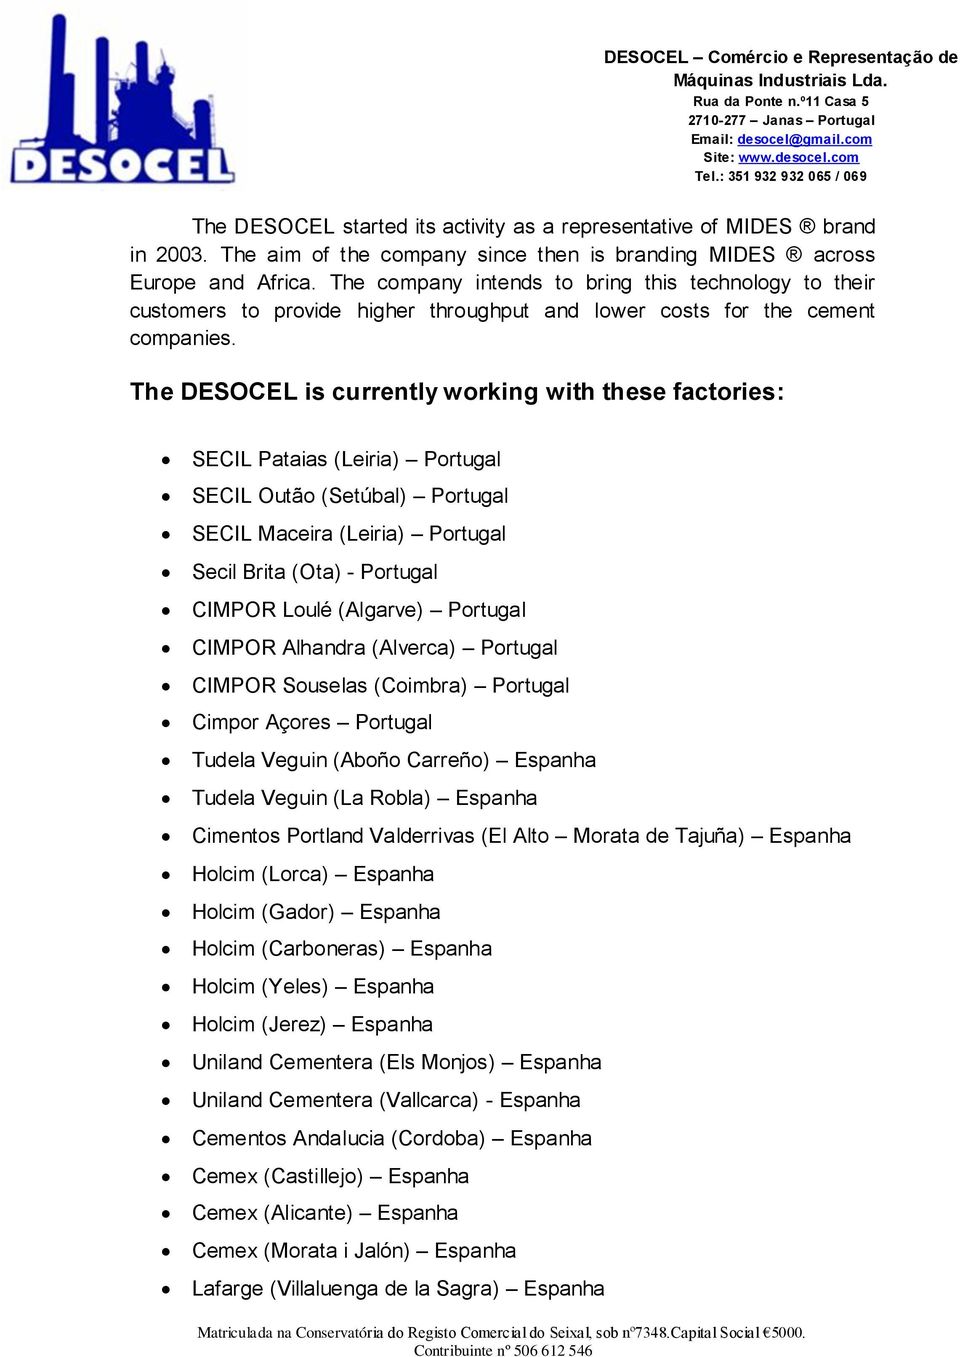 The DESOCEL is currently working with these factories: SECIL Pataias (Leiria) Portugal SECIL Outão (Setúbal) Portugal SECIL Maceira (Leiria) Portugal Secil Brita (Ota) - Portugal CIMPOR Loulé